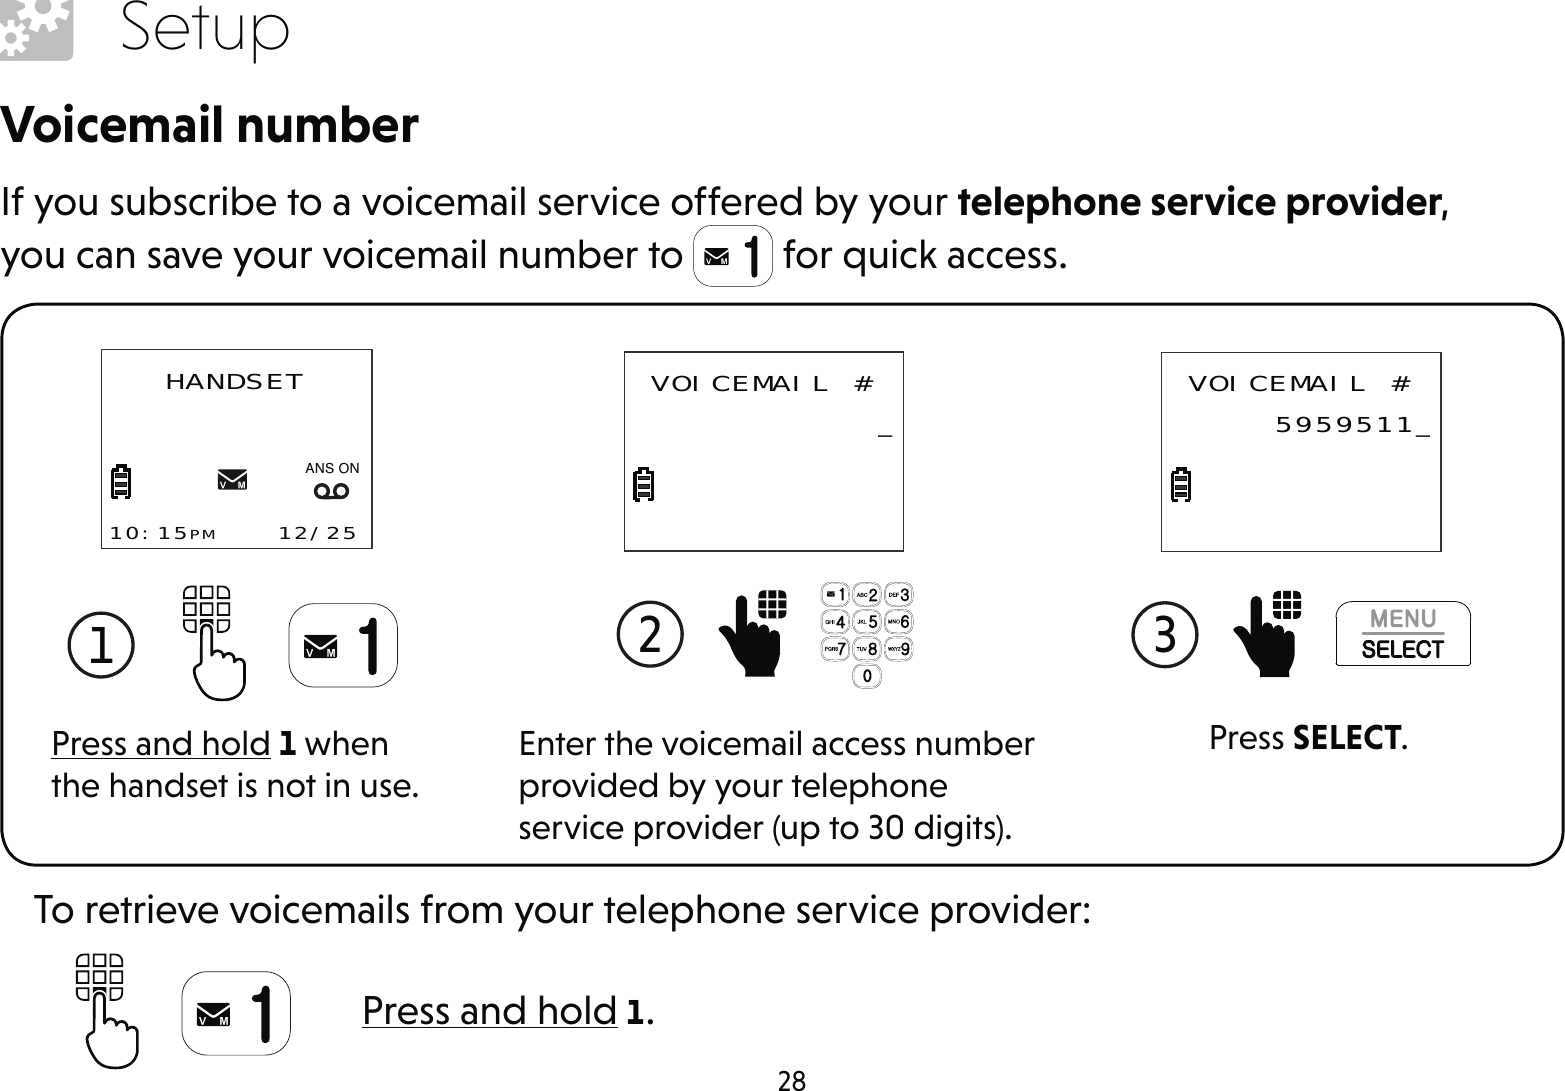 28SetupVoicemail numberIf you subscribe to a voicemail service offered by your telephone service provider, you can save your voicemail number to   for quick access.Press and hold 1 when the handset is not in use.1 HANDSET10:15PM    12/25$1621Enter the voicemail access number provided by your telephone service provider (up to 30 digits).2  VOICEMAIL # _Press SELECT.3  VOICEMAIL # 5959511_Press and hold 1.To retrieve voicemails from your telephone service provider: